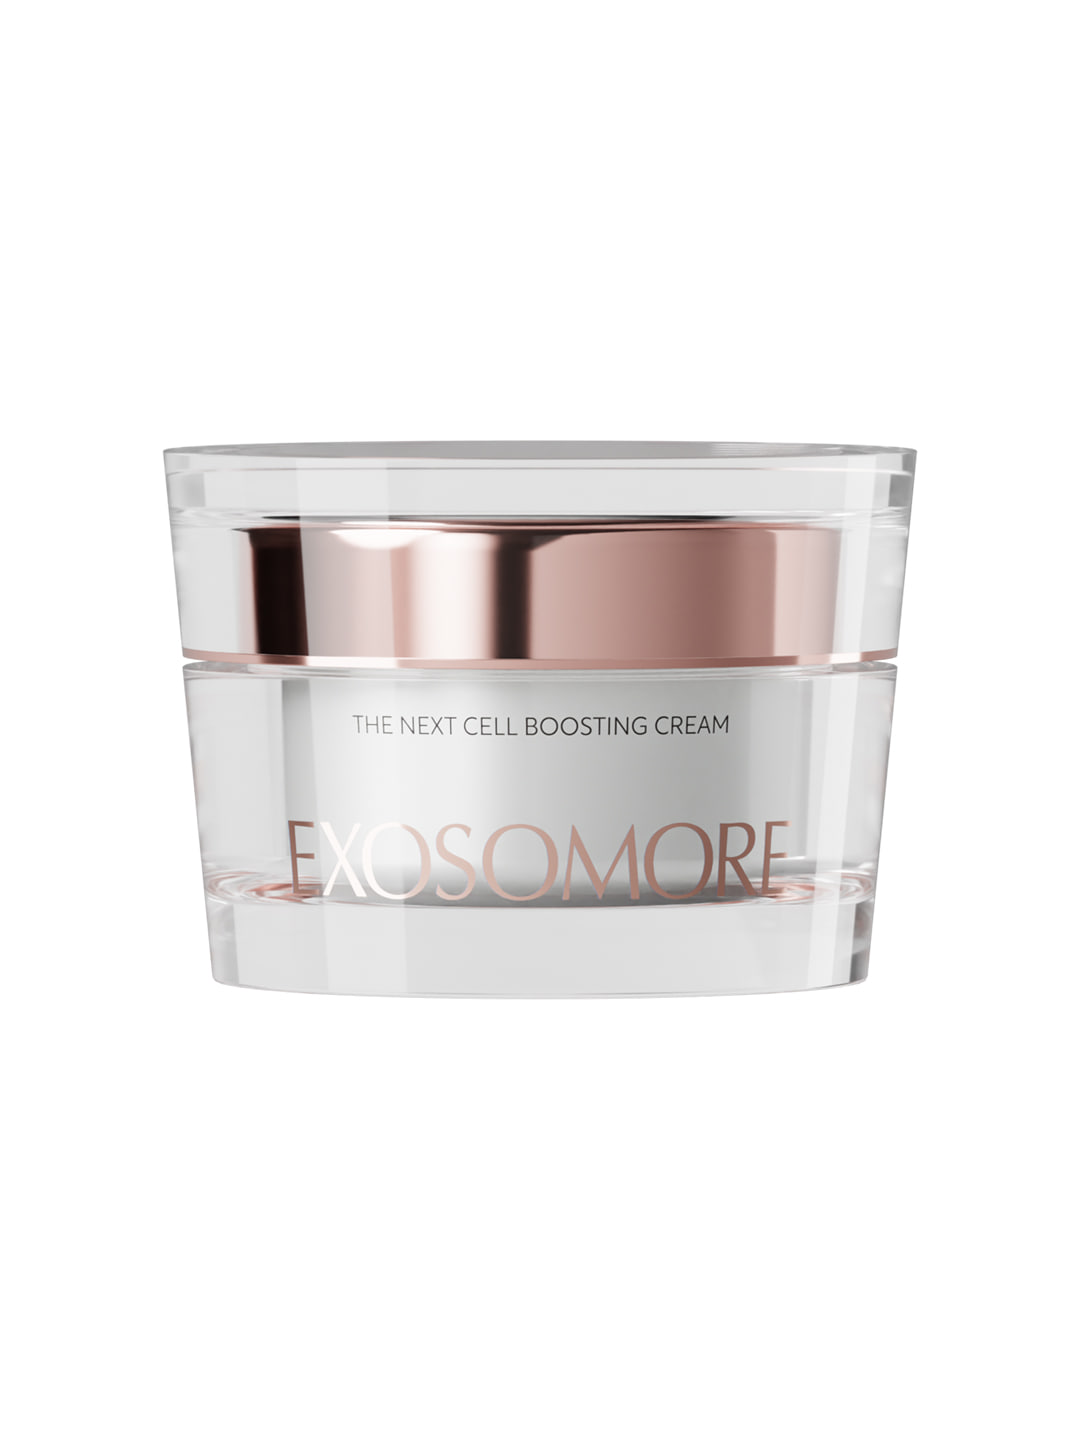 EXOSOMORE the Next Cell Boosting Cream